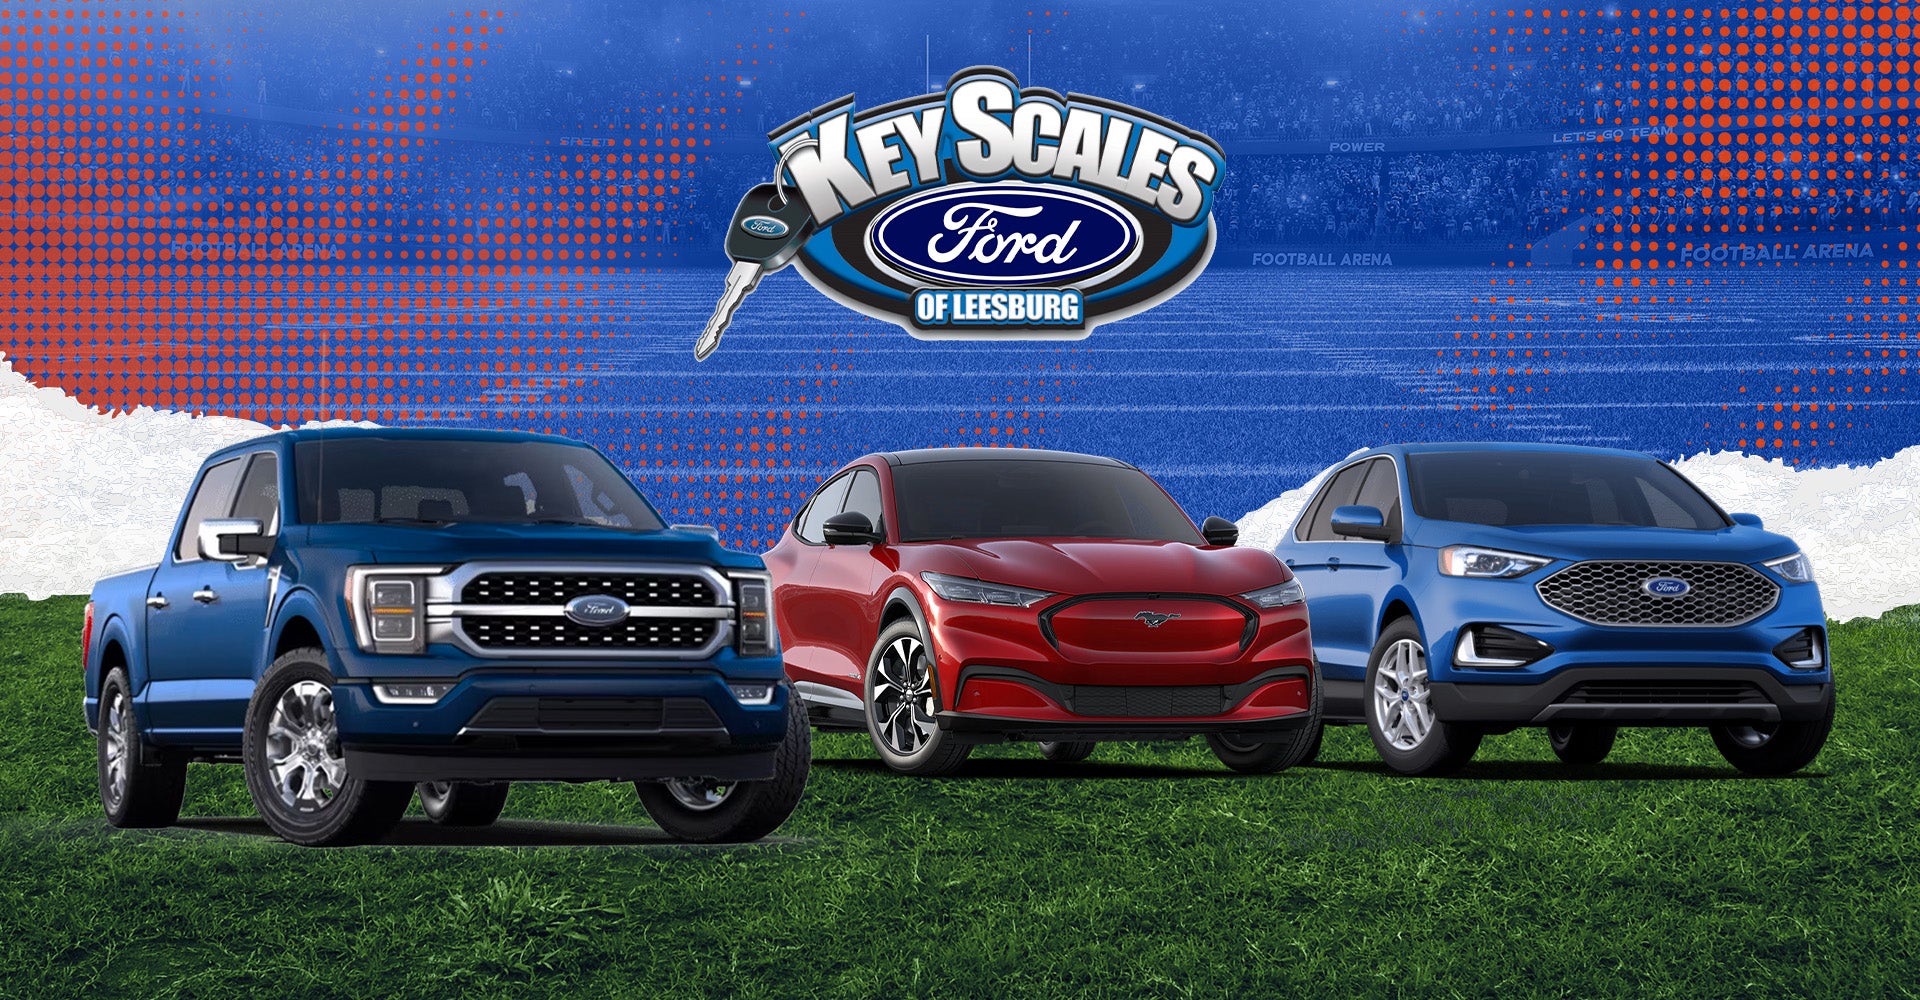 Key Scales Ford Specials